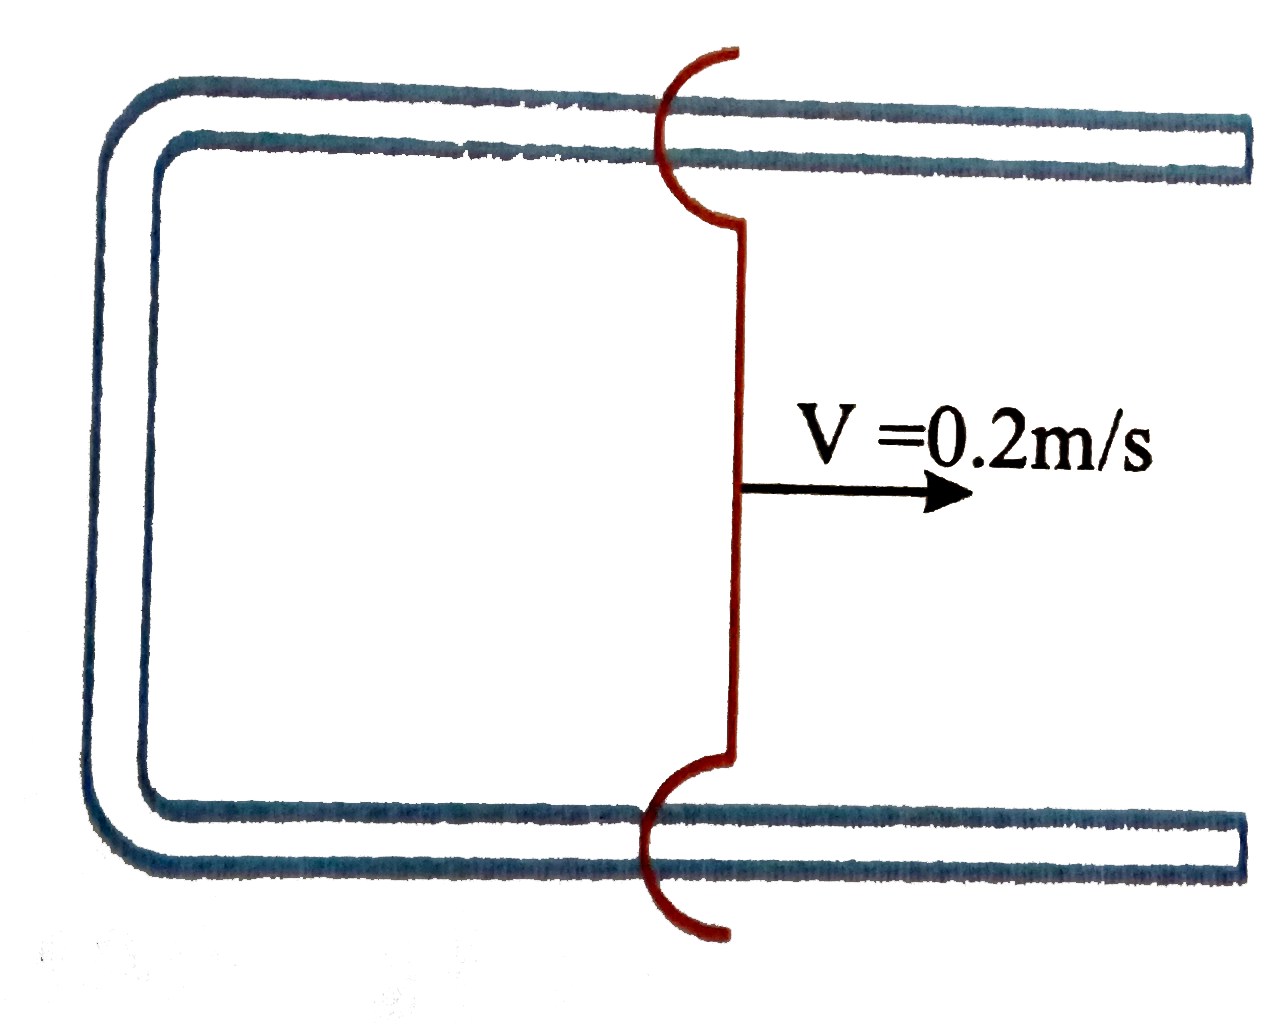 A straight conducting rod of length 30 cm and having a resistance of 0.2 ohm is allowed to slide over two parallel thick metallic rails with uniform velocity of 0.2 m//s as shown in the figure. The rails are  situated in a horizontal plane if the horizontal component of earth's magnetic field is 0.3 xx 10^(-4)T and a steady current of 3 muA is induced through the rod. The angle of dip will be: